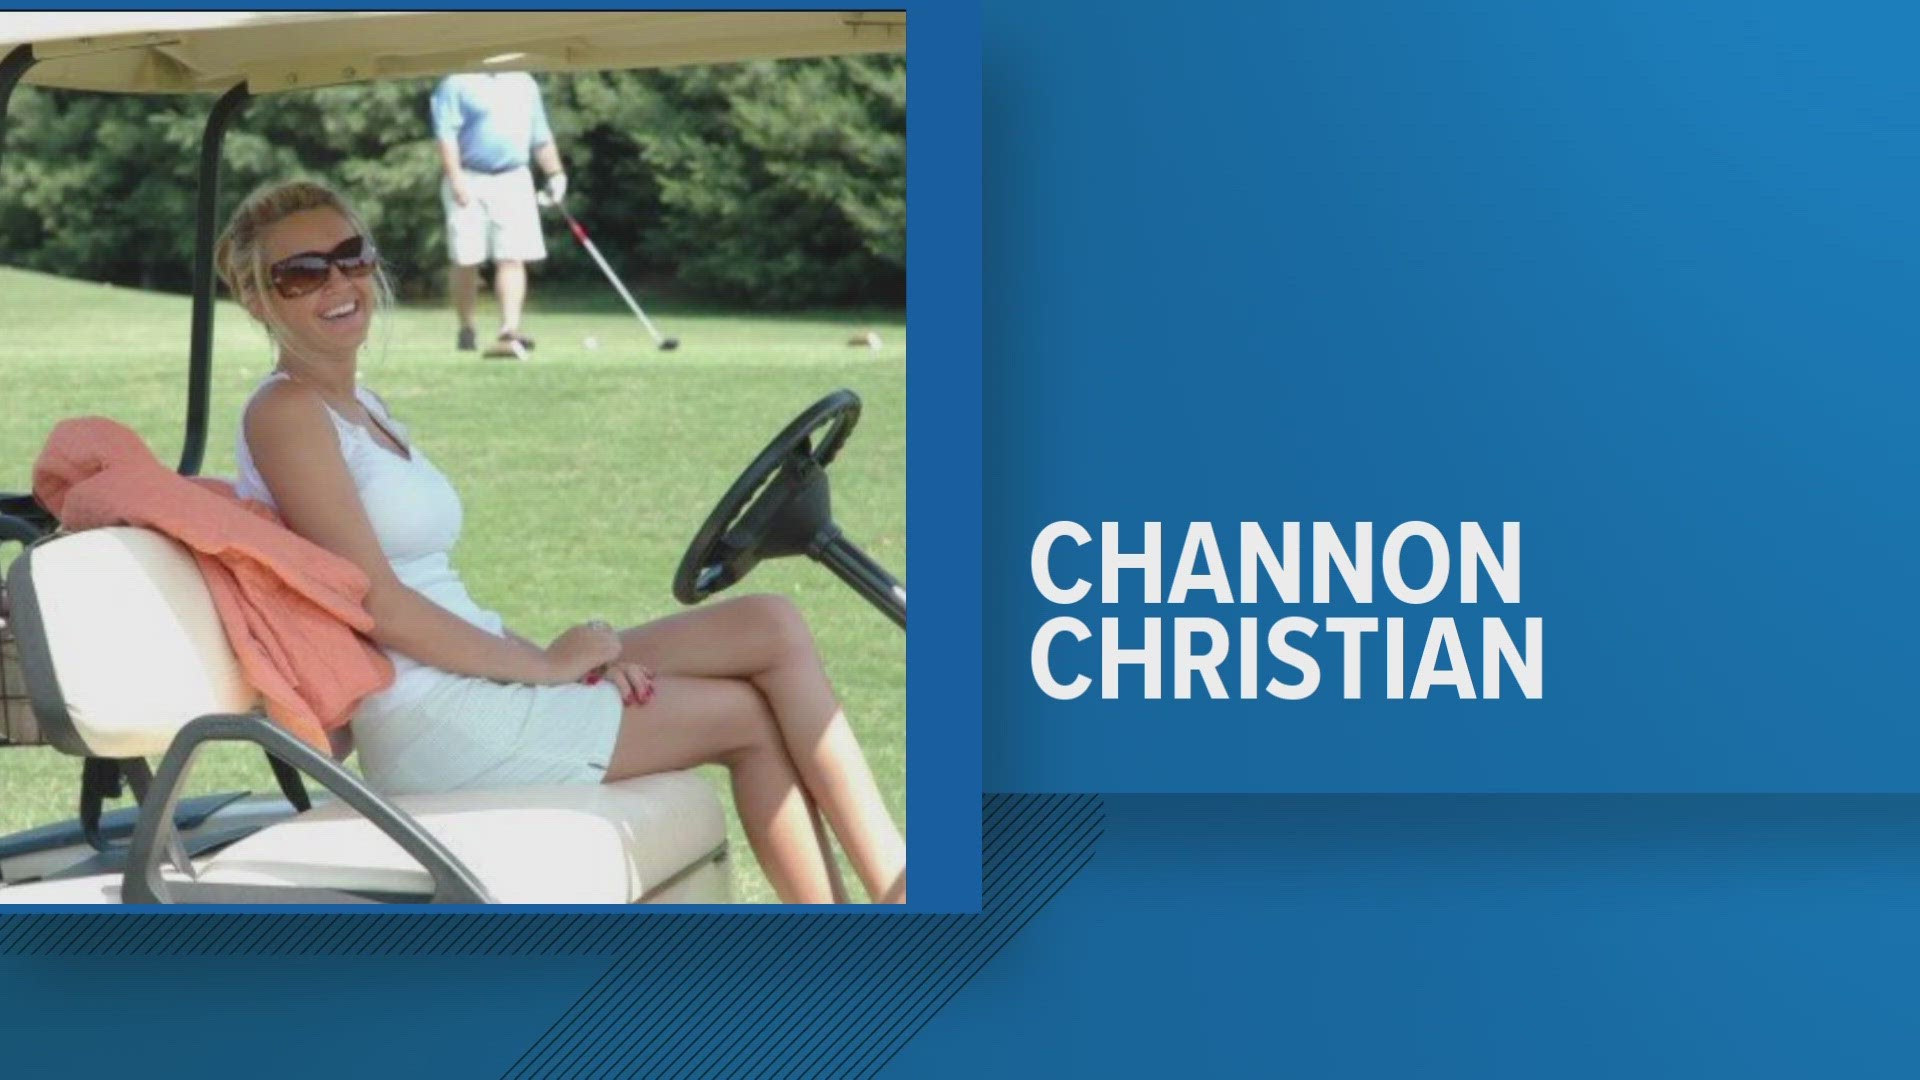 Channon Gail Christian and her boyfriend Chris Newsom, were carjacked and murdered in January 2007. Since then, her family created a foundation to honor her.